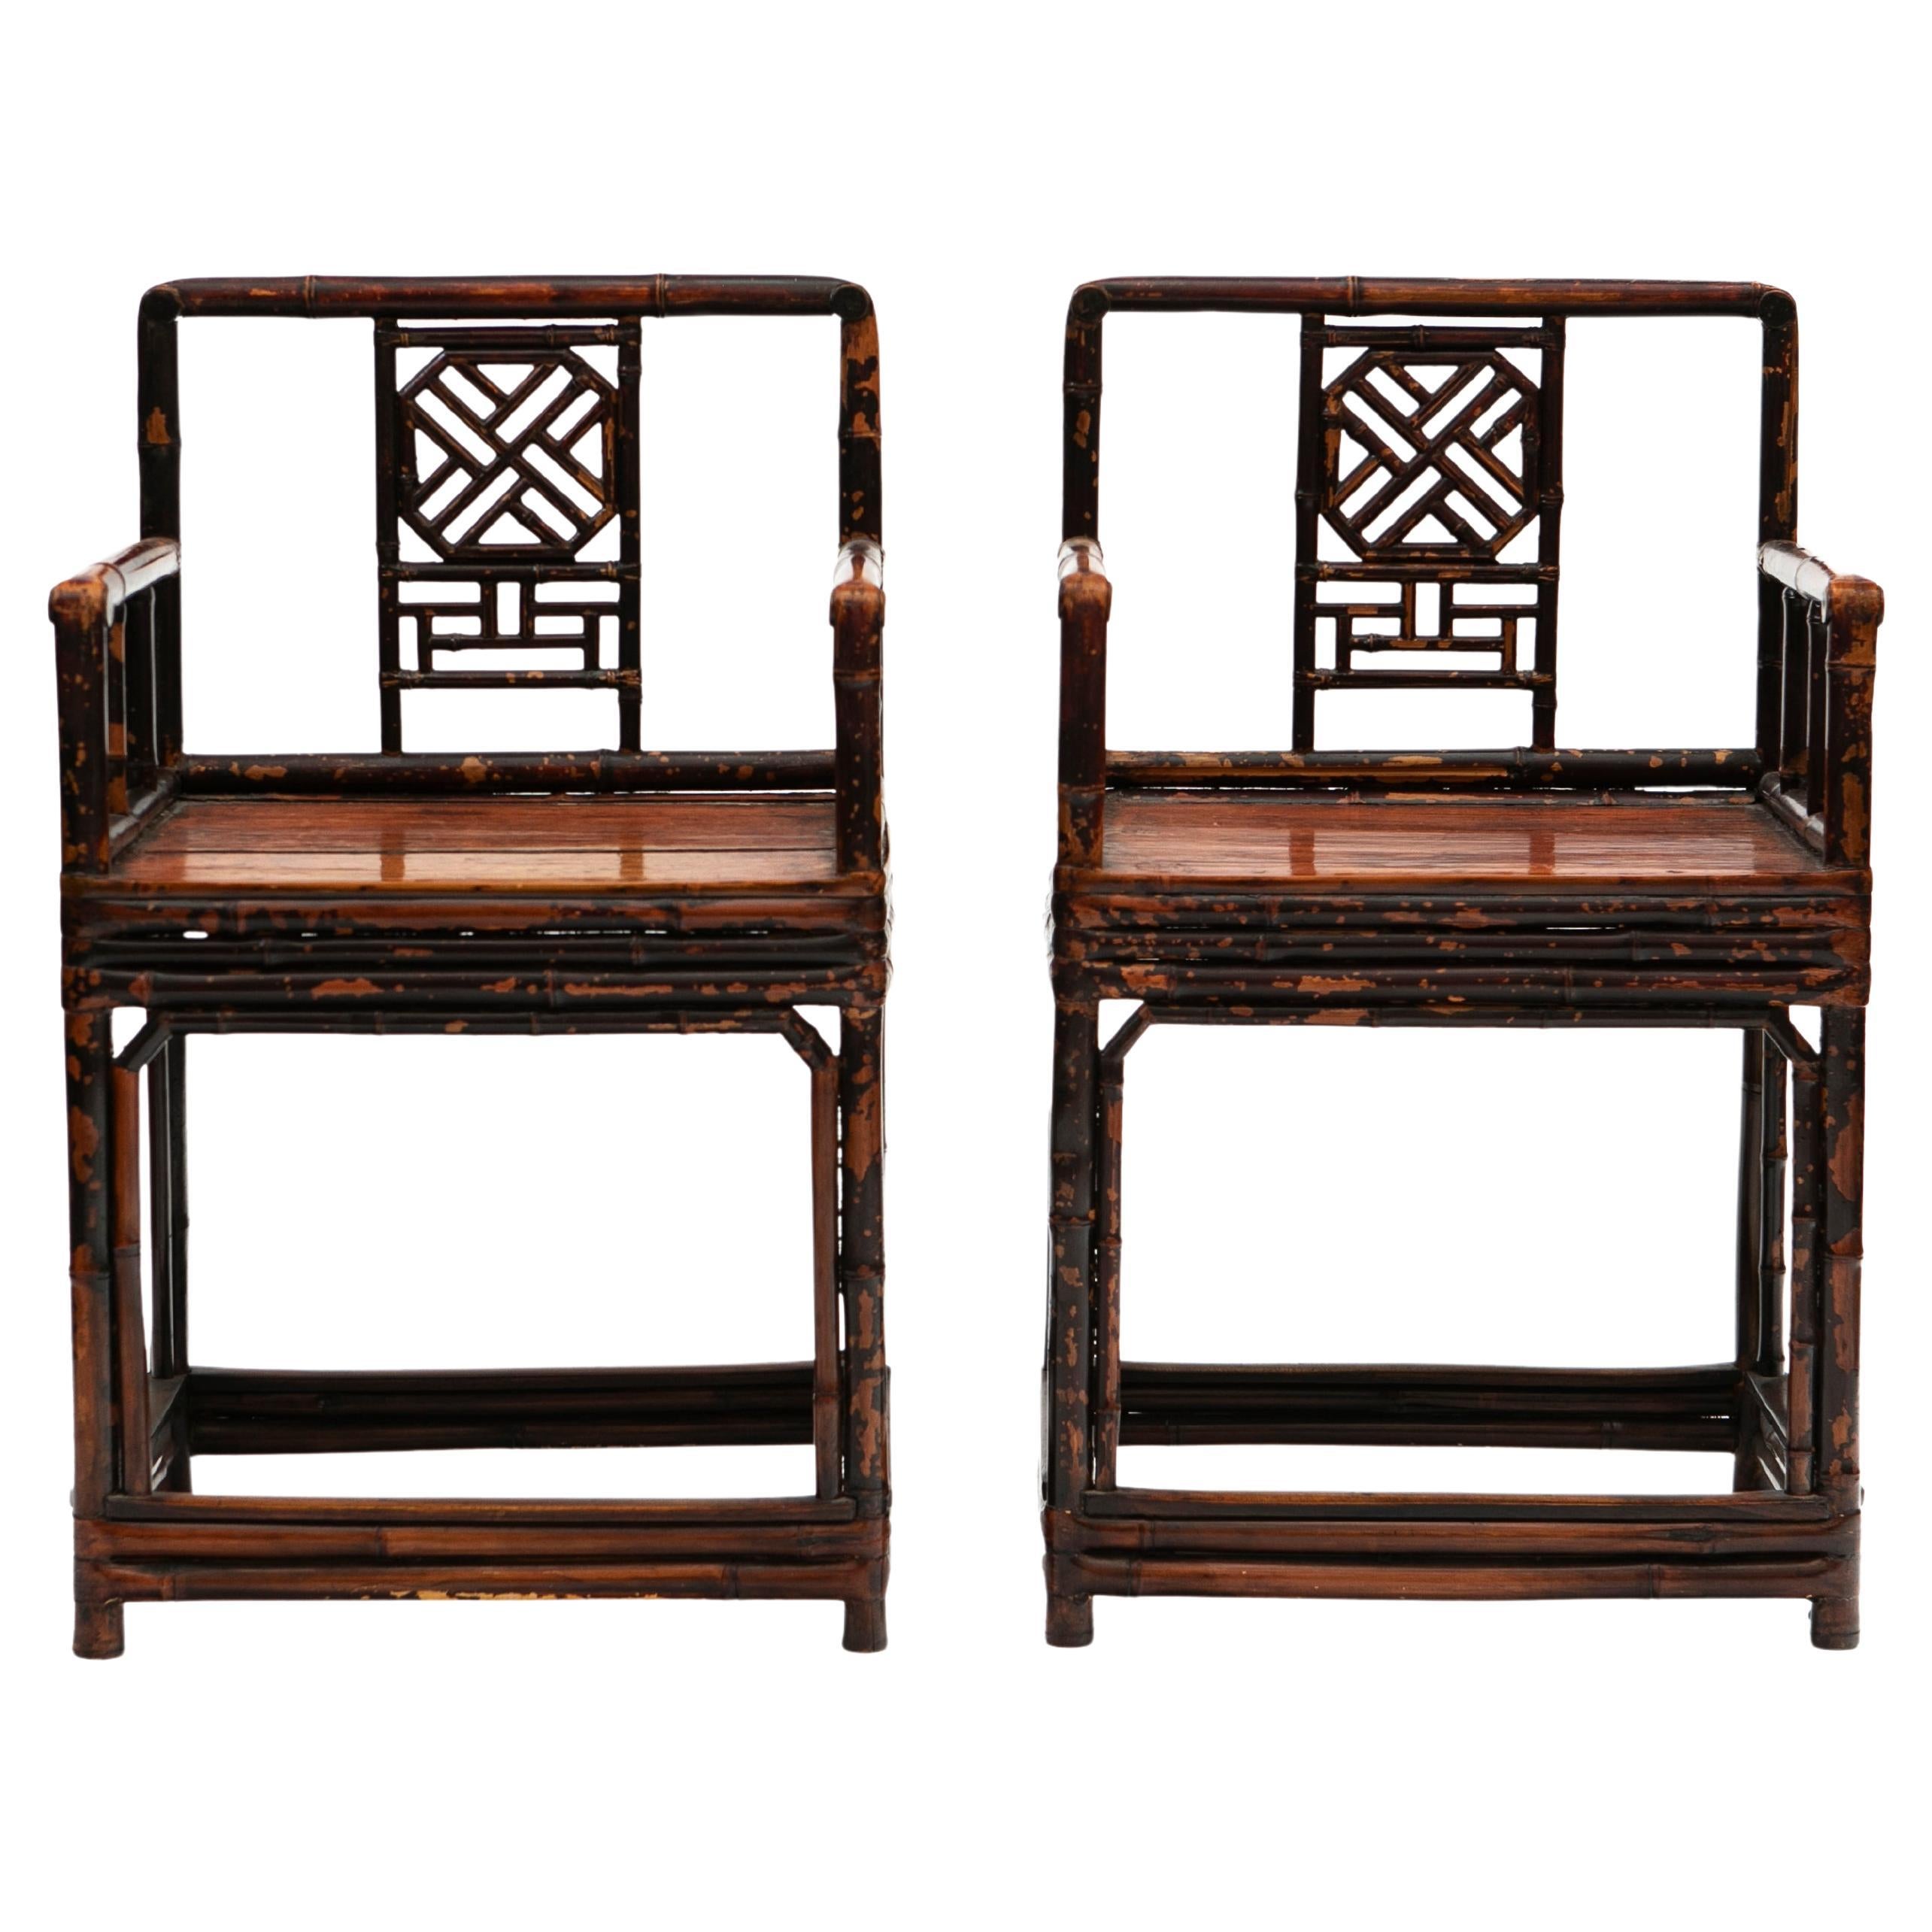 Pair of 19th Century Chinese Qing Period Bamboo Arm Chairs with Burgundy Lacquer